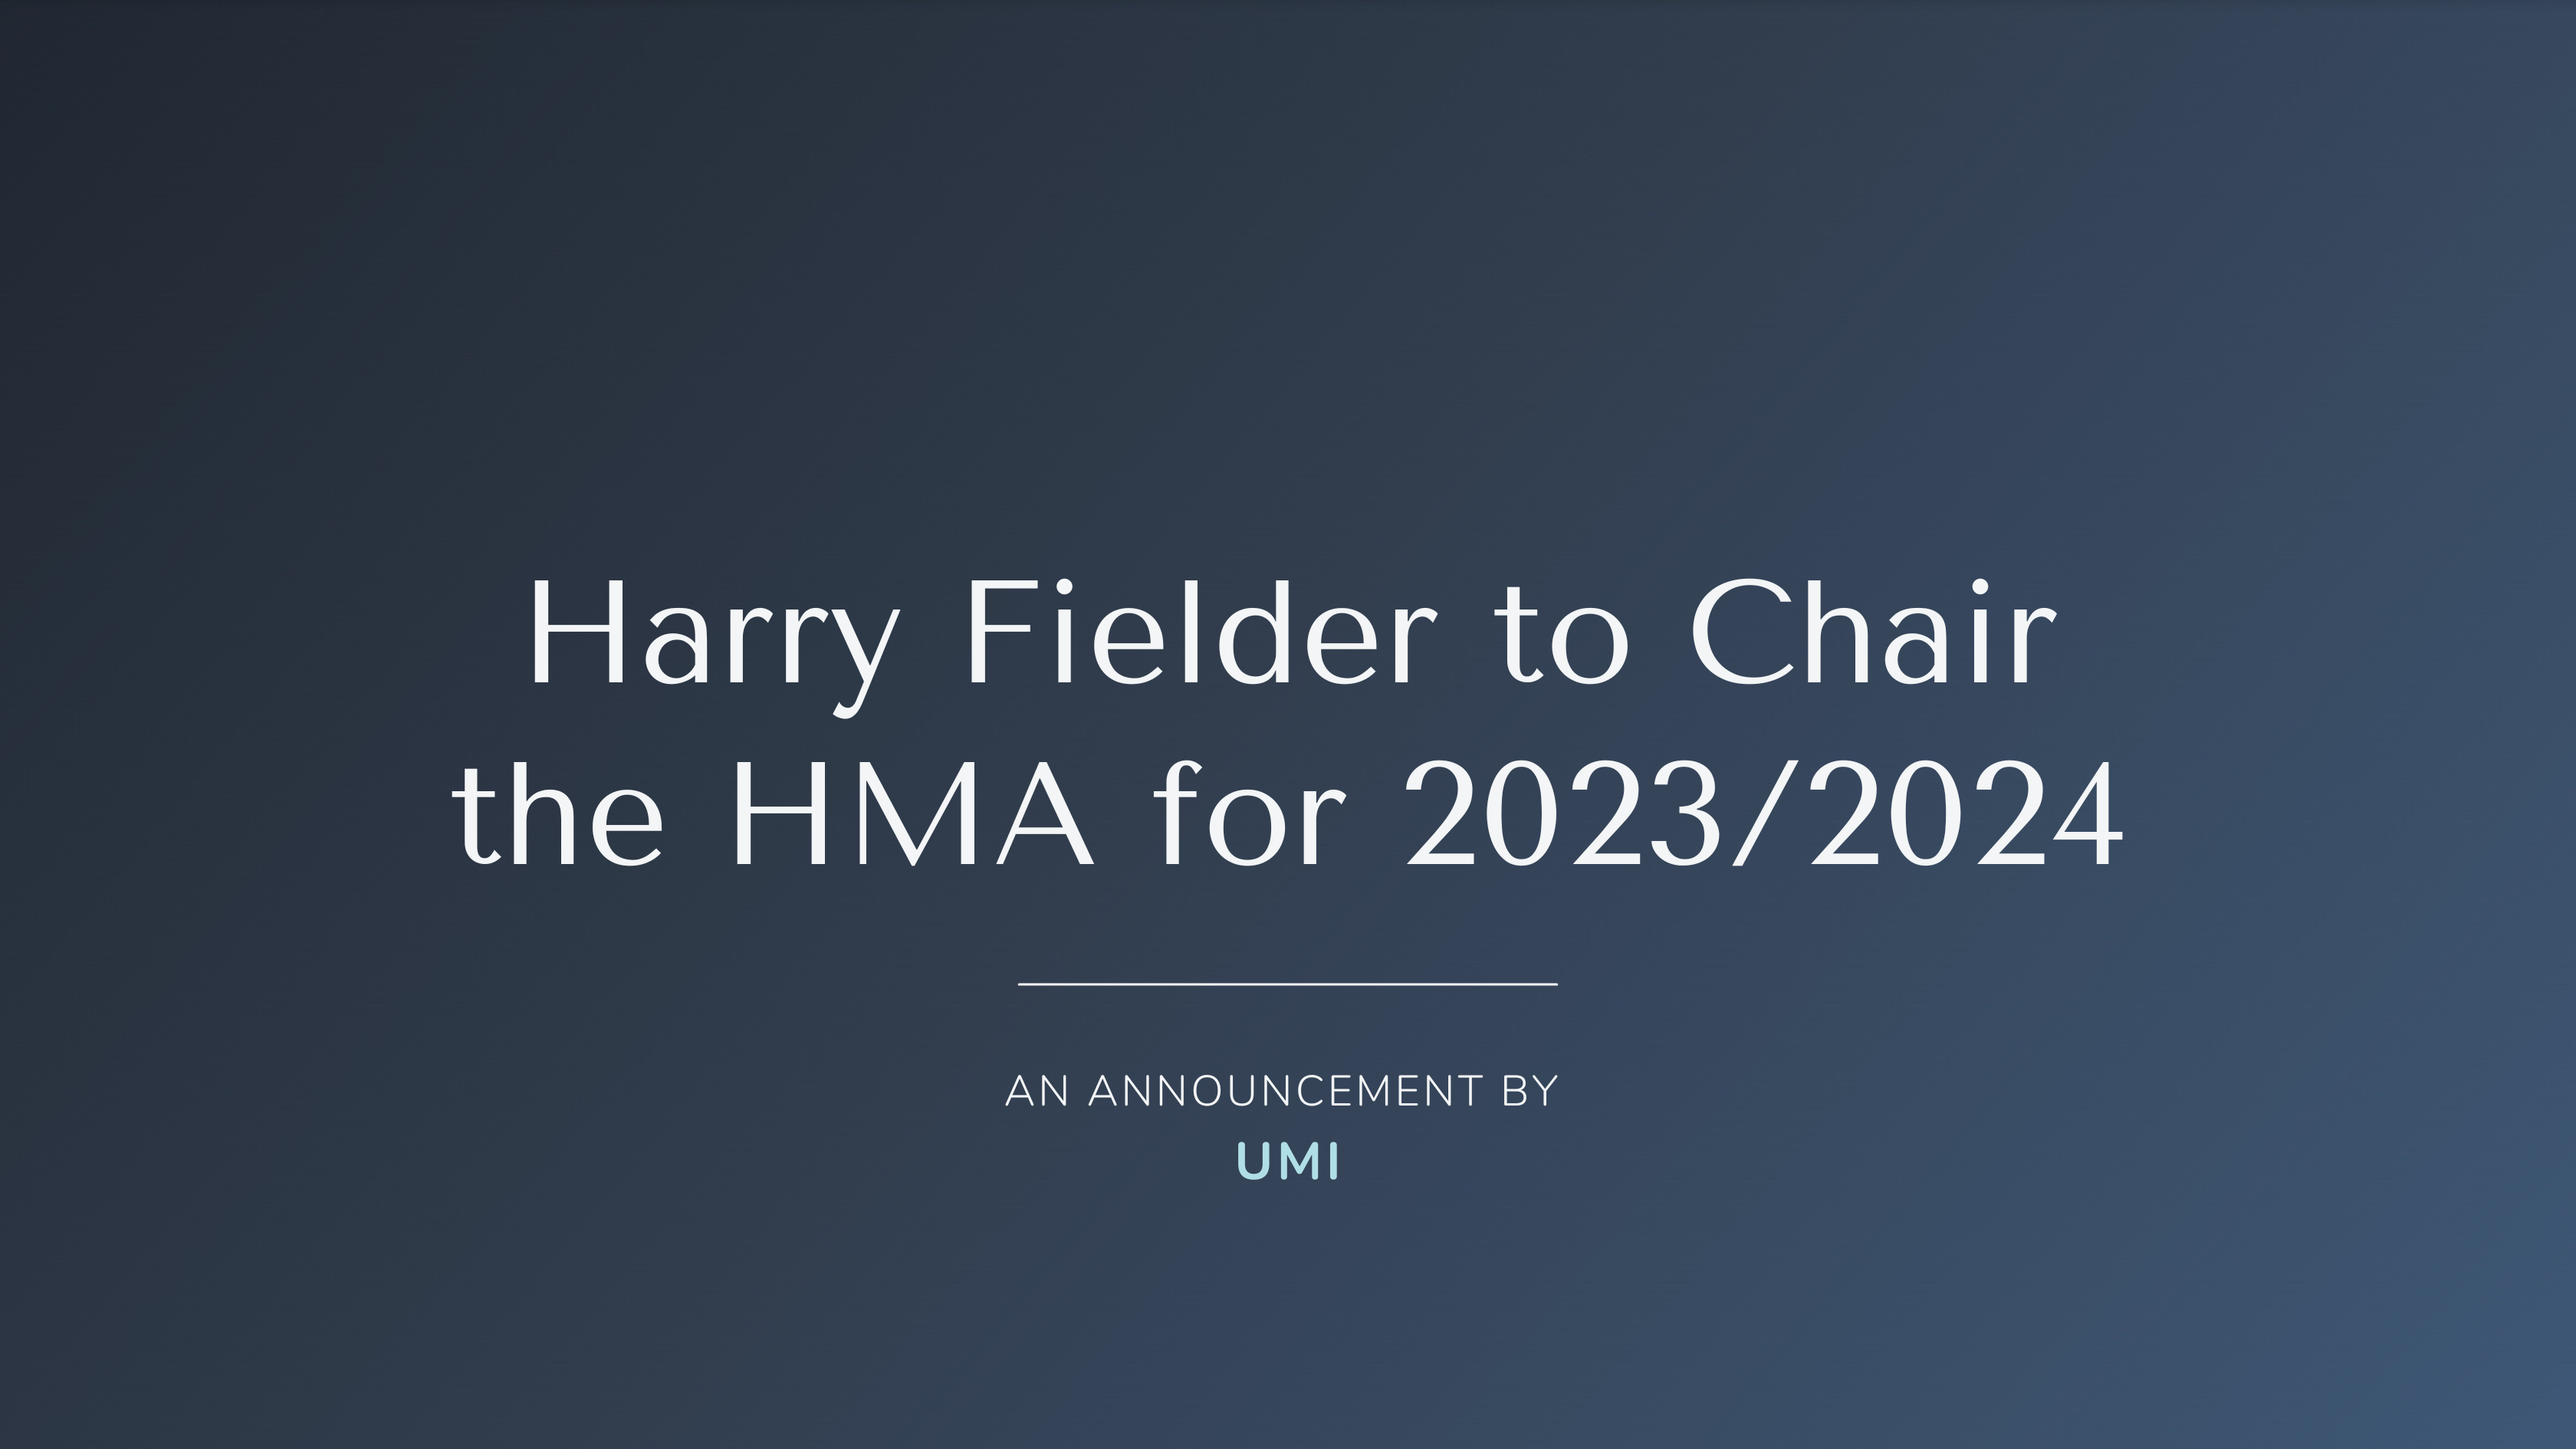 Harry Fielder to Chair the HMA for 2023/2024 | Umi Digital